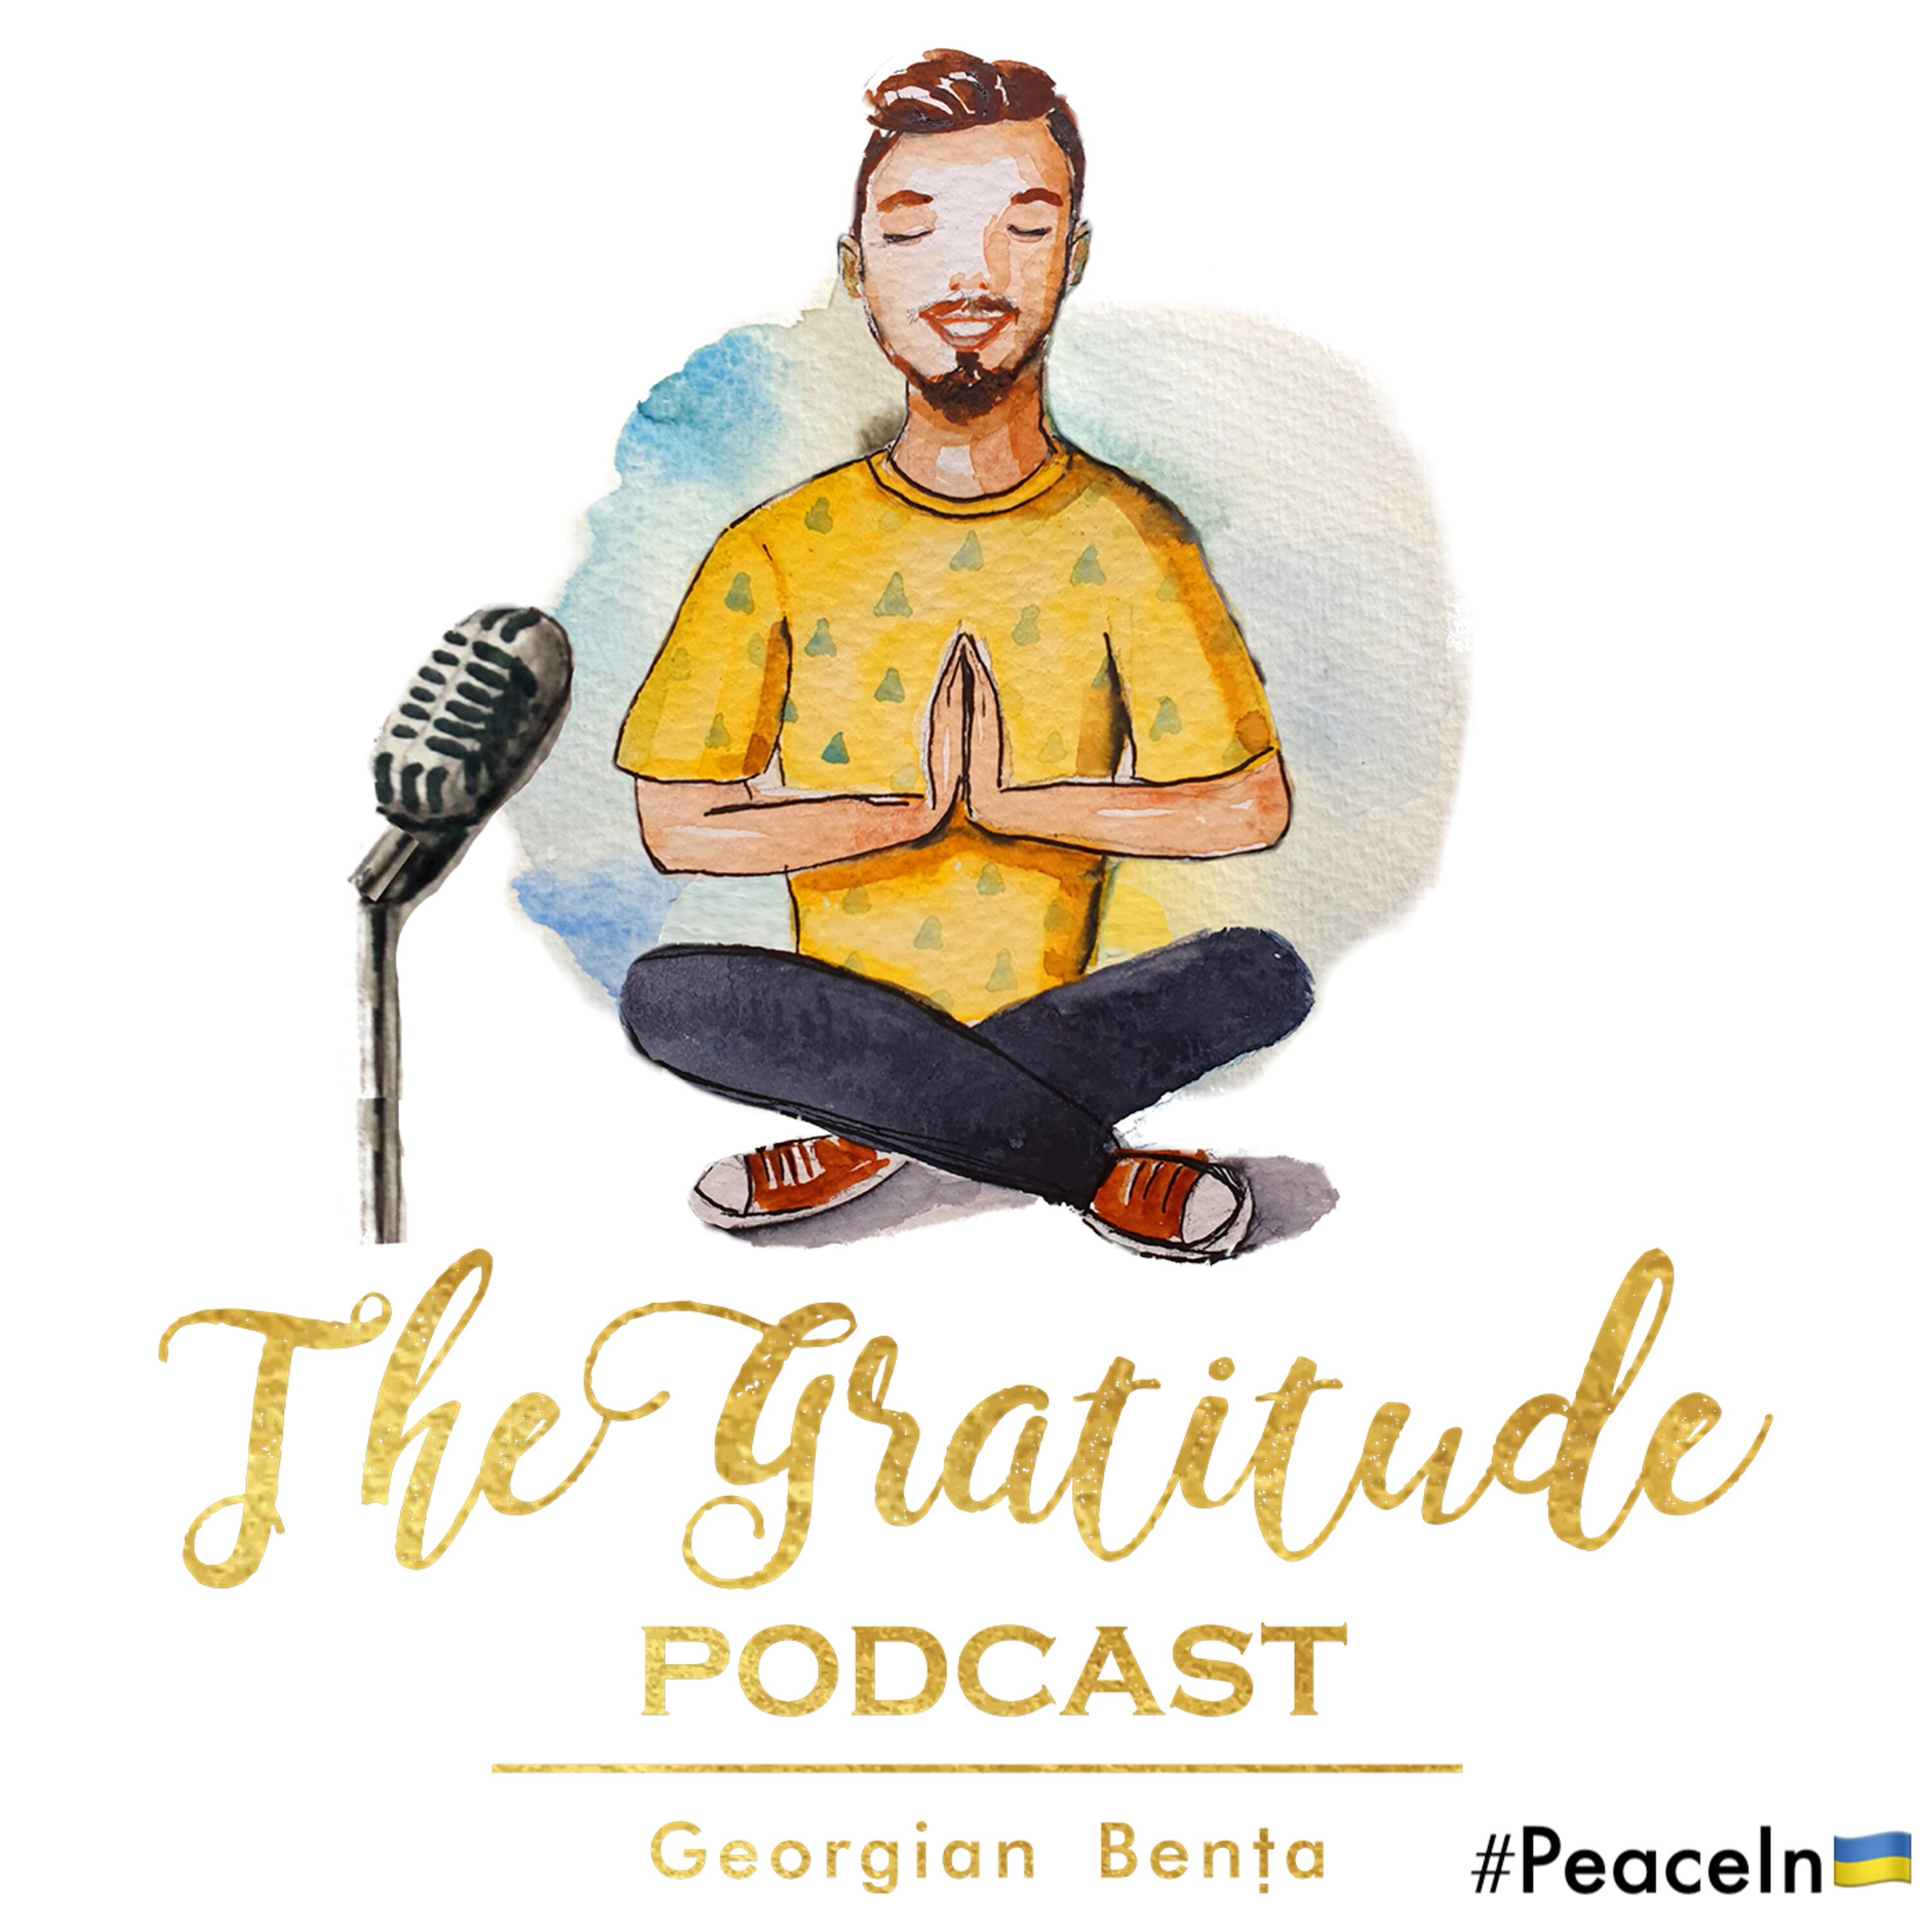 Eckhart Tolle on Gratitude - 5 Ideas That Can Change Your Life (ep. 759)